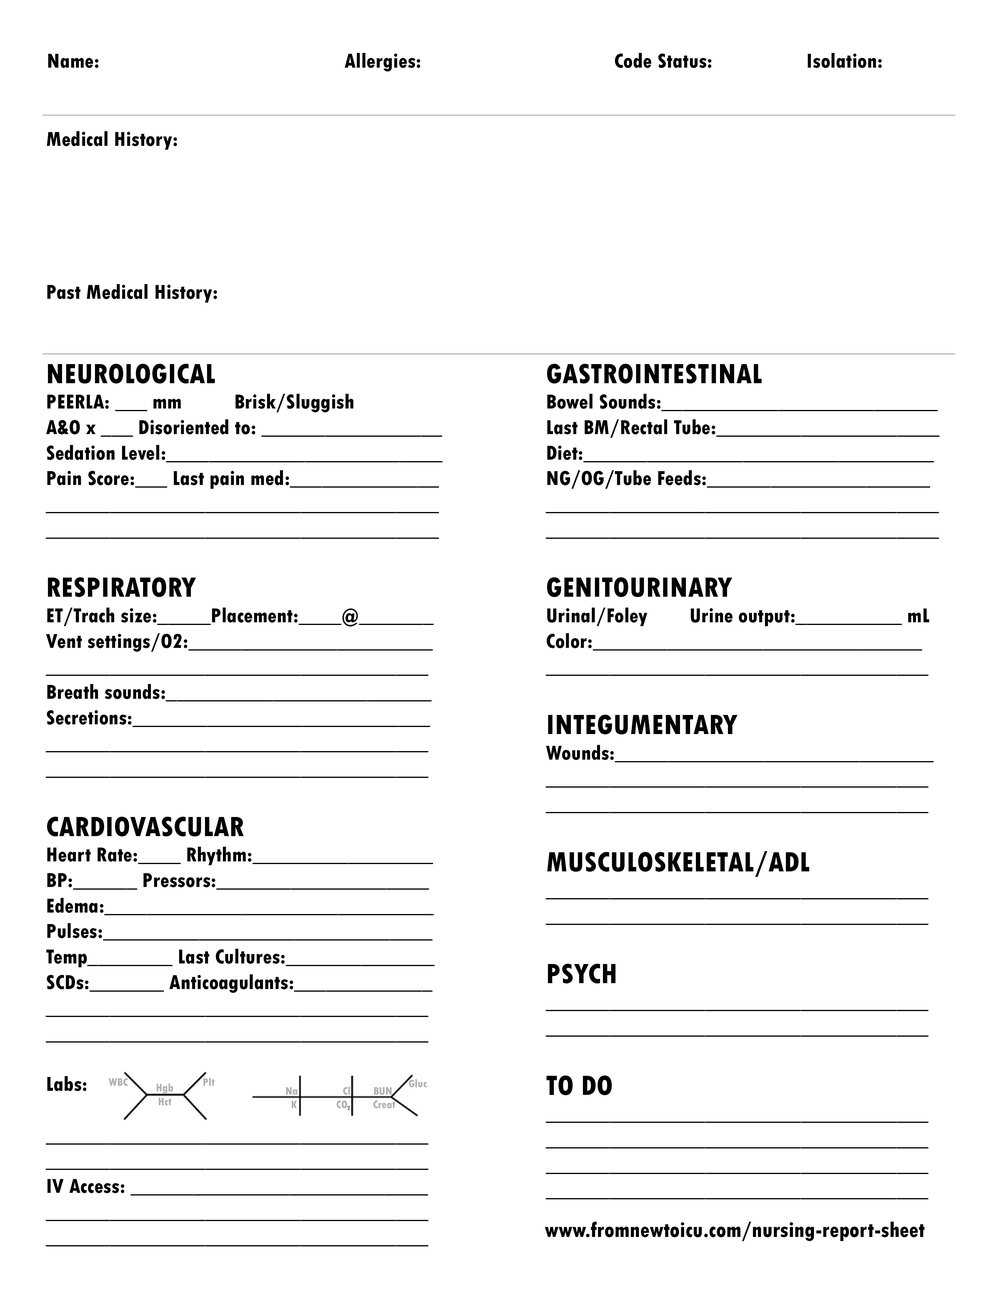 Nursing Report Sheet — From New To Icu Throughout Nurse Report Sheet Templates